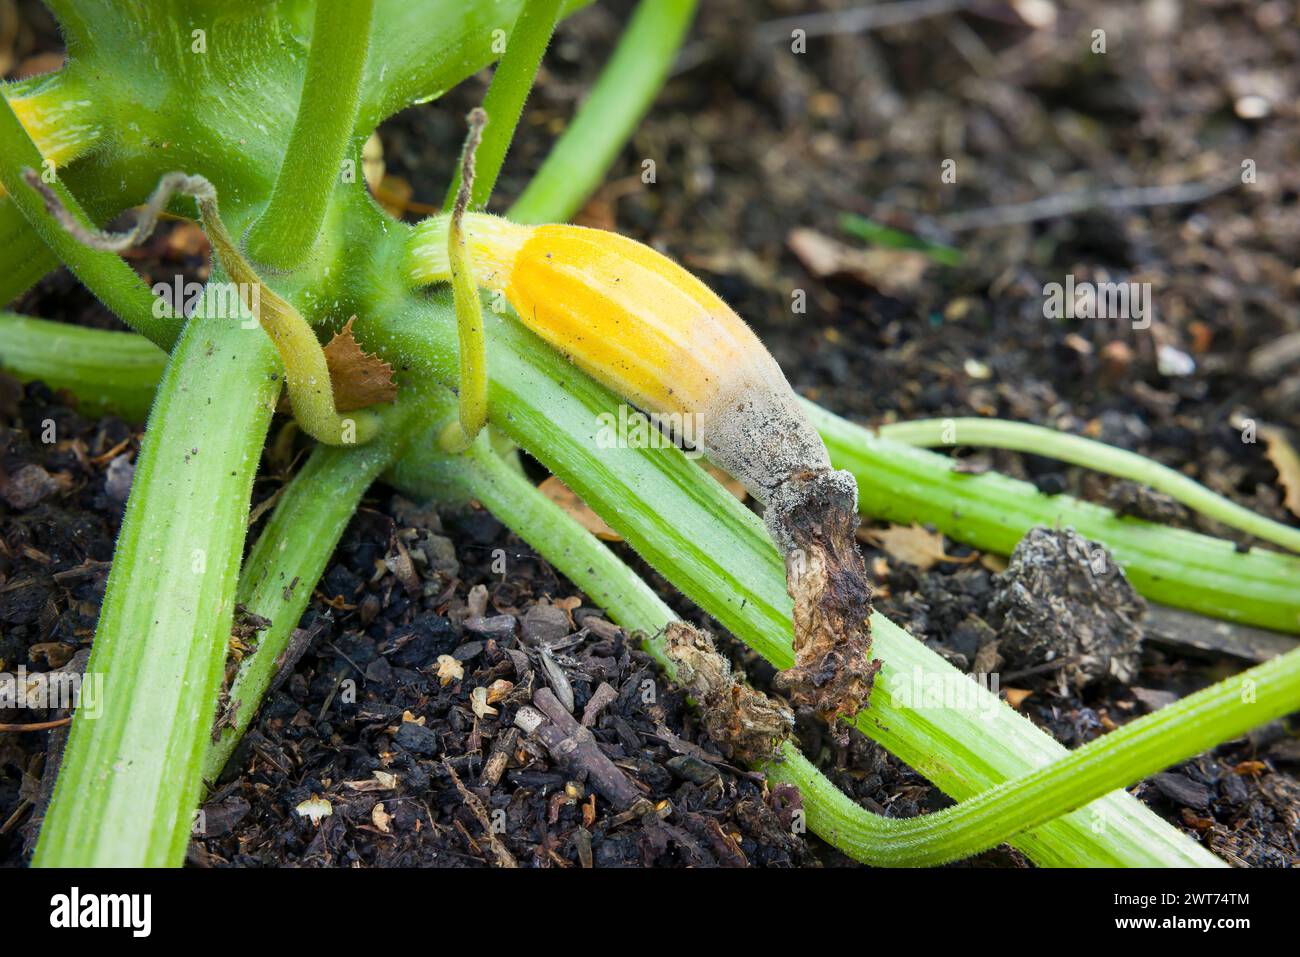 Blossom end rot, rotten courgette (zucchini) on a Sunstripe courgette plant, UK garden Stock Photo